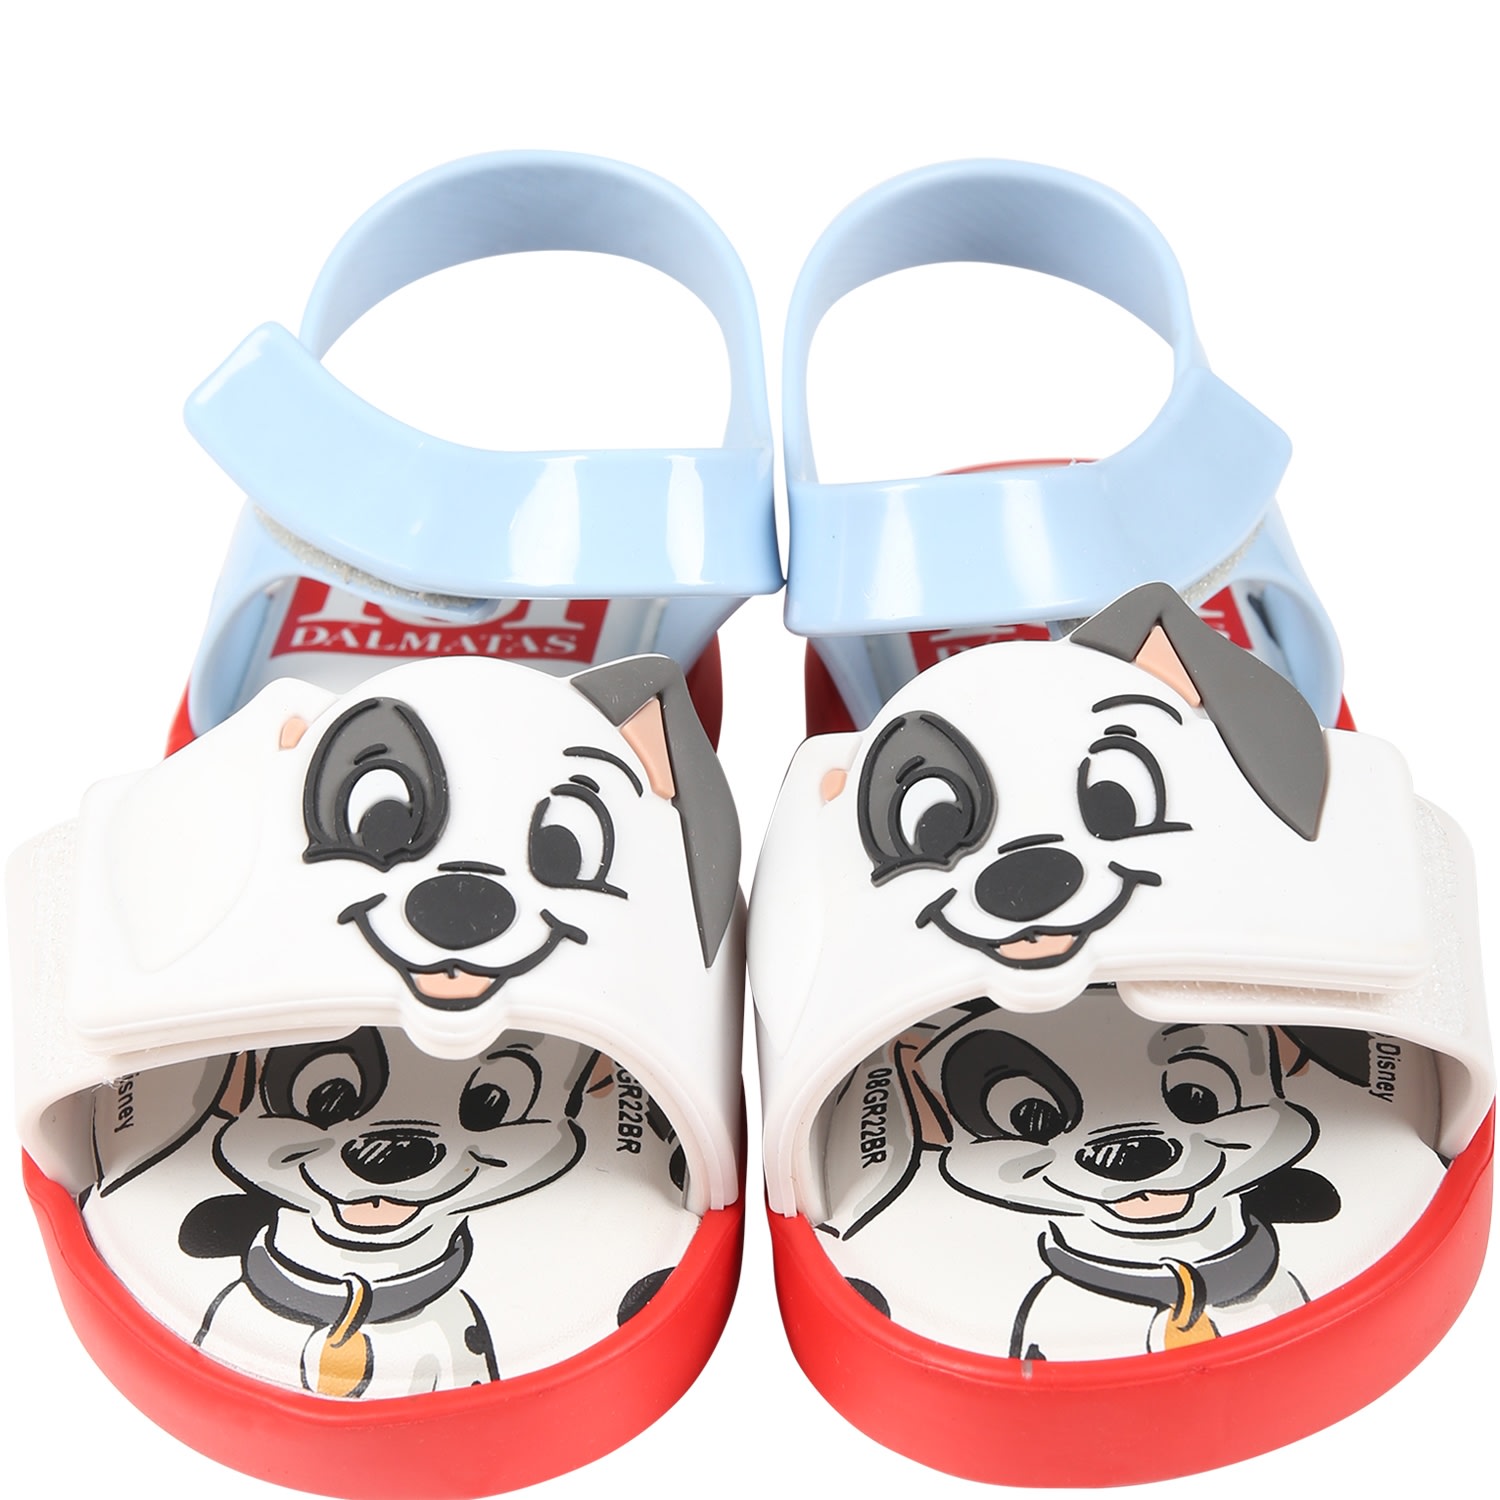 Shop Melissa Red Sandals For Kids With 101 Dalmatians